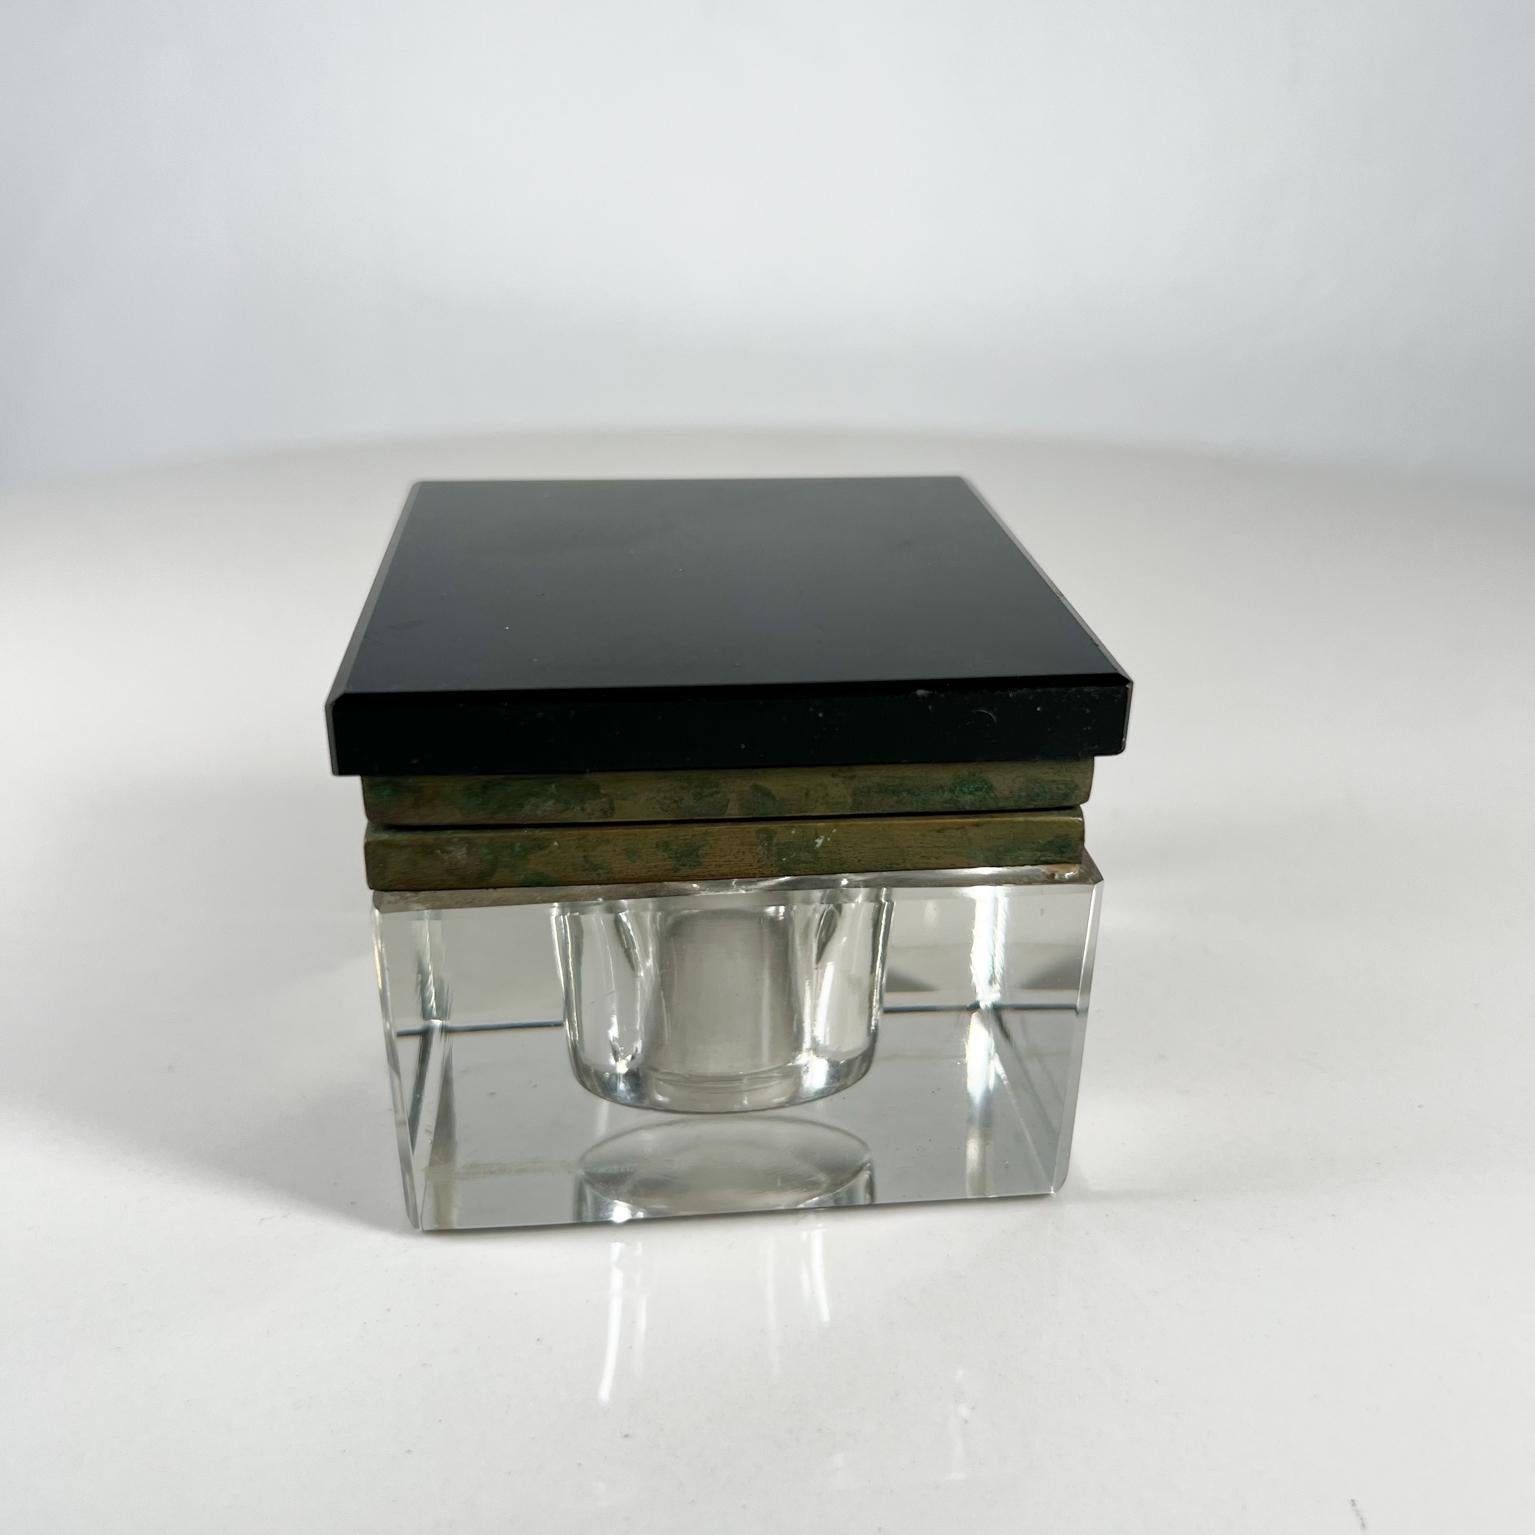 1920s Art Deco antique square glass ink well
Unmarked.
Measures: 2.5 tall x 2.88 x 2.88
Preowned original unrestored vintage condition.
Refer to images.